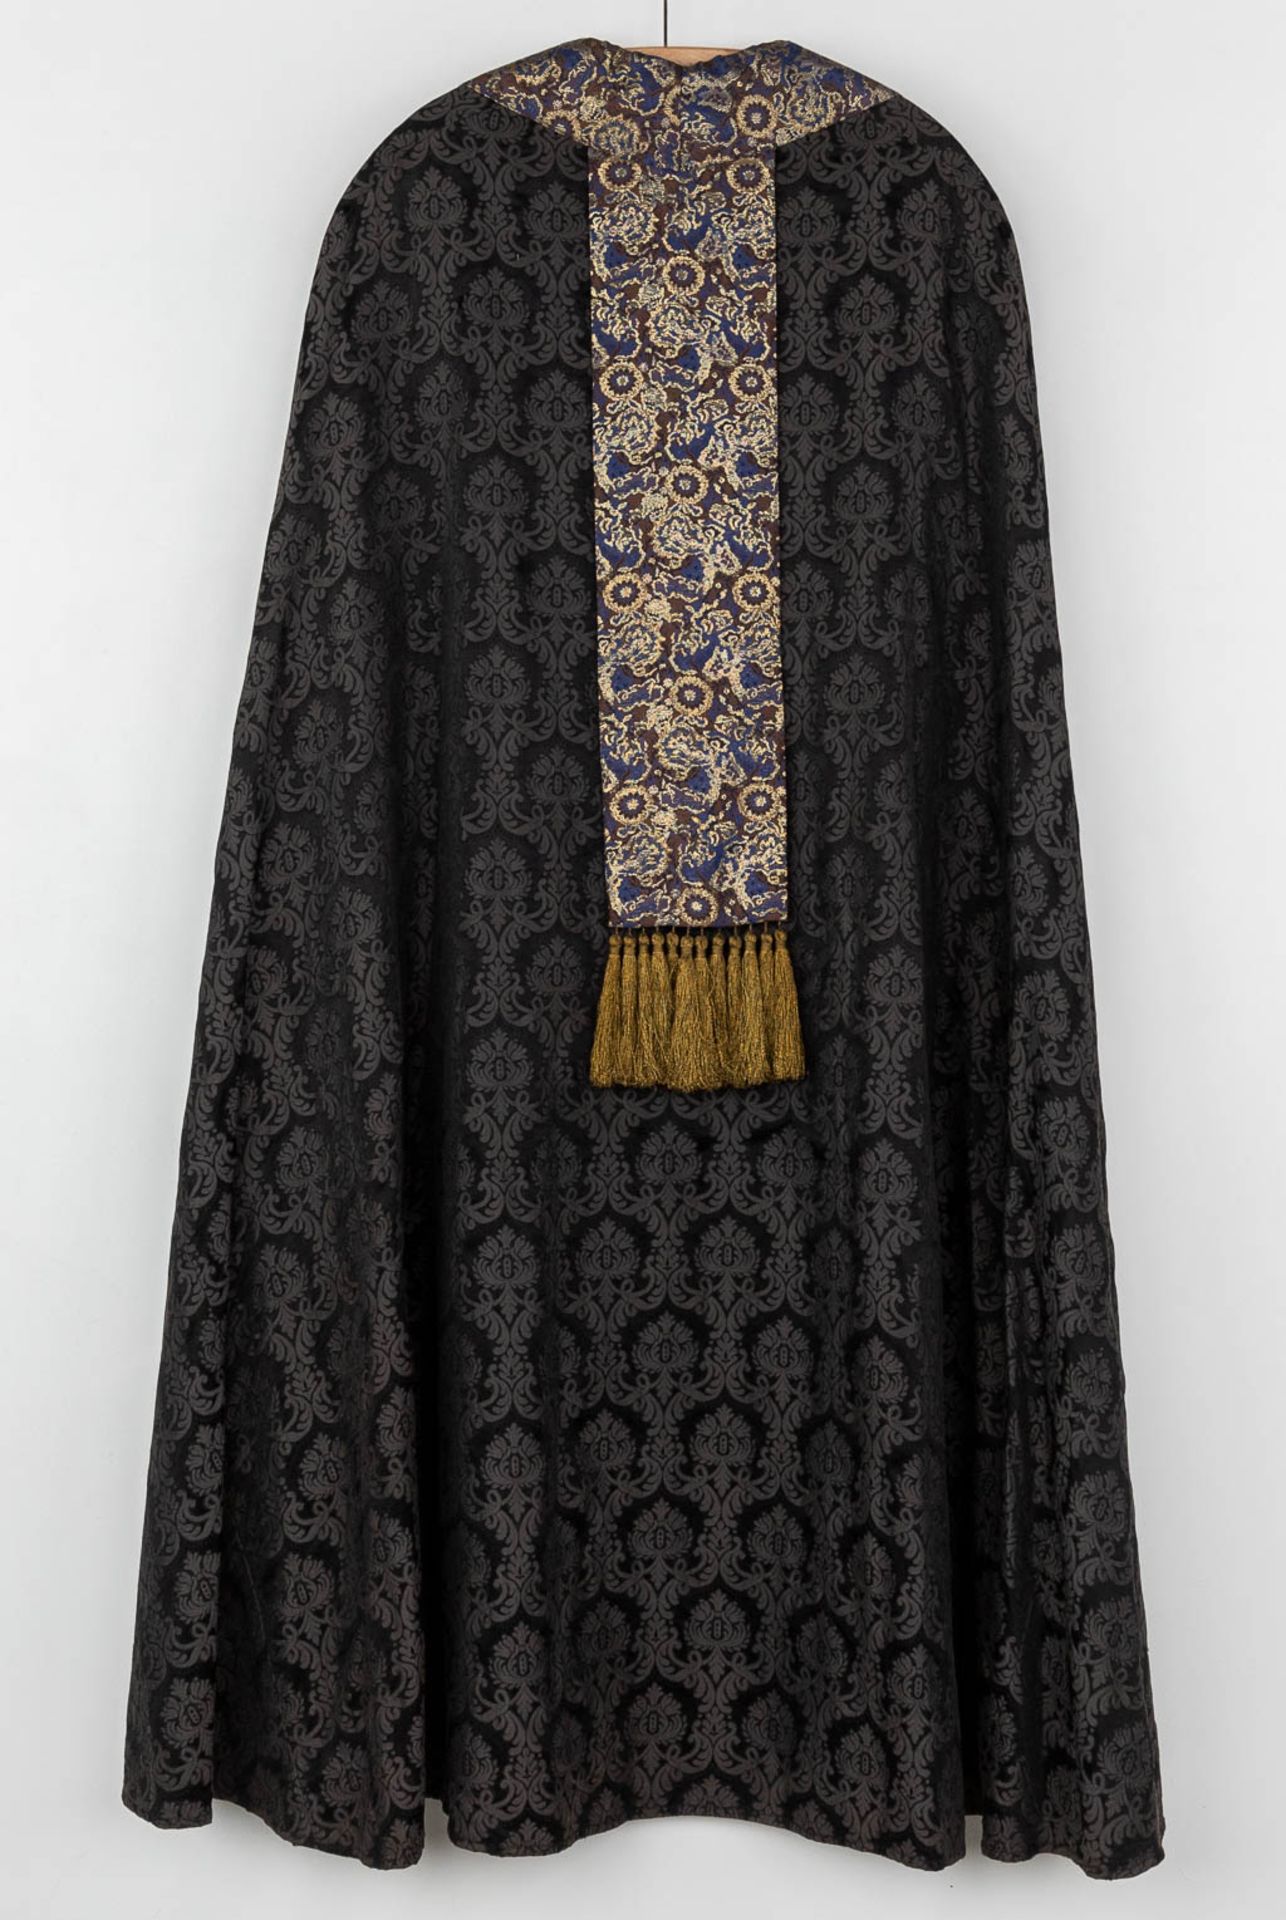 A Roman Chasuble, Two Dalmatics and a Cope. Black textile with embroideries. - Bild 36 aus 49